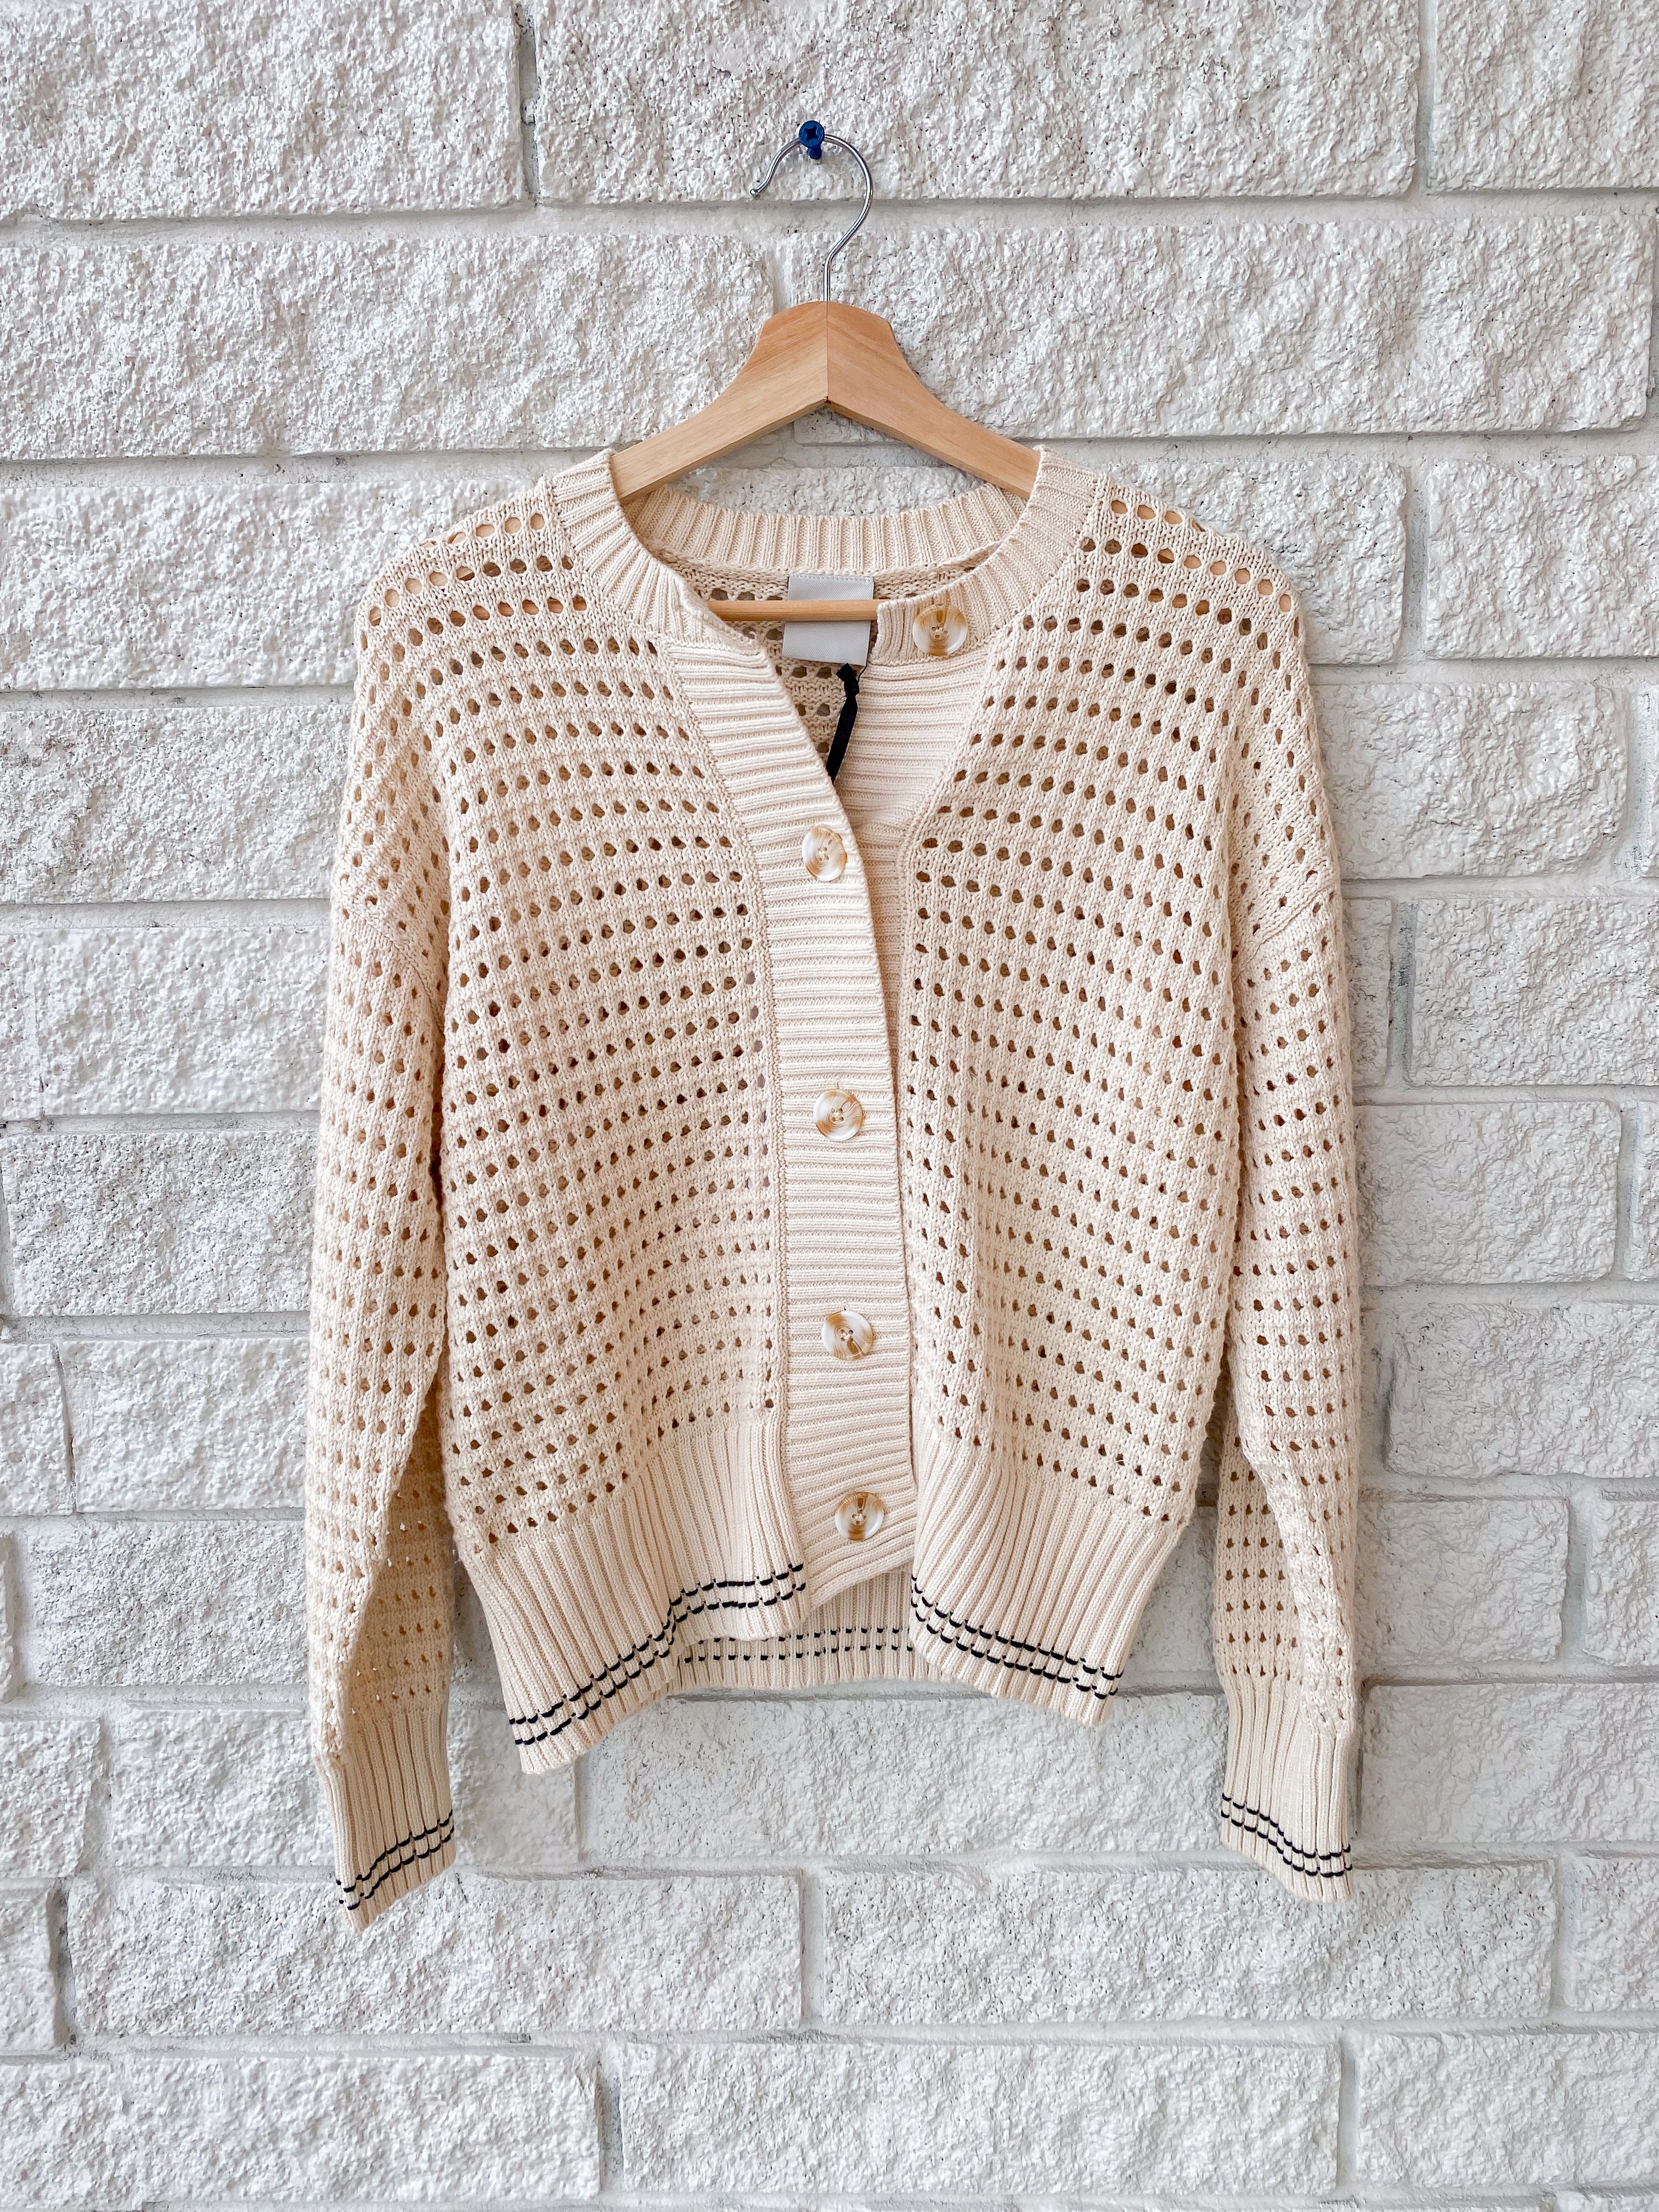 Kris Relaxed Fit Knit Jacket